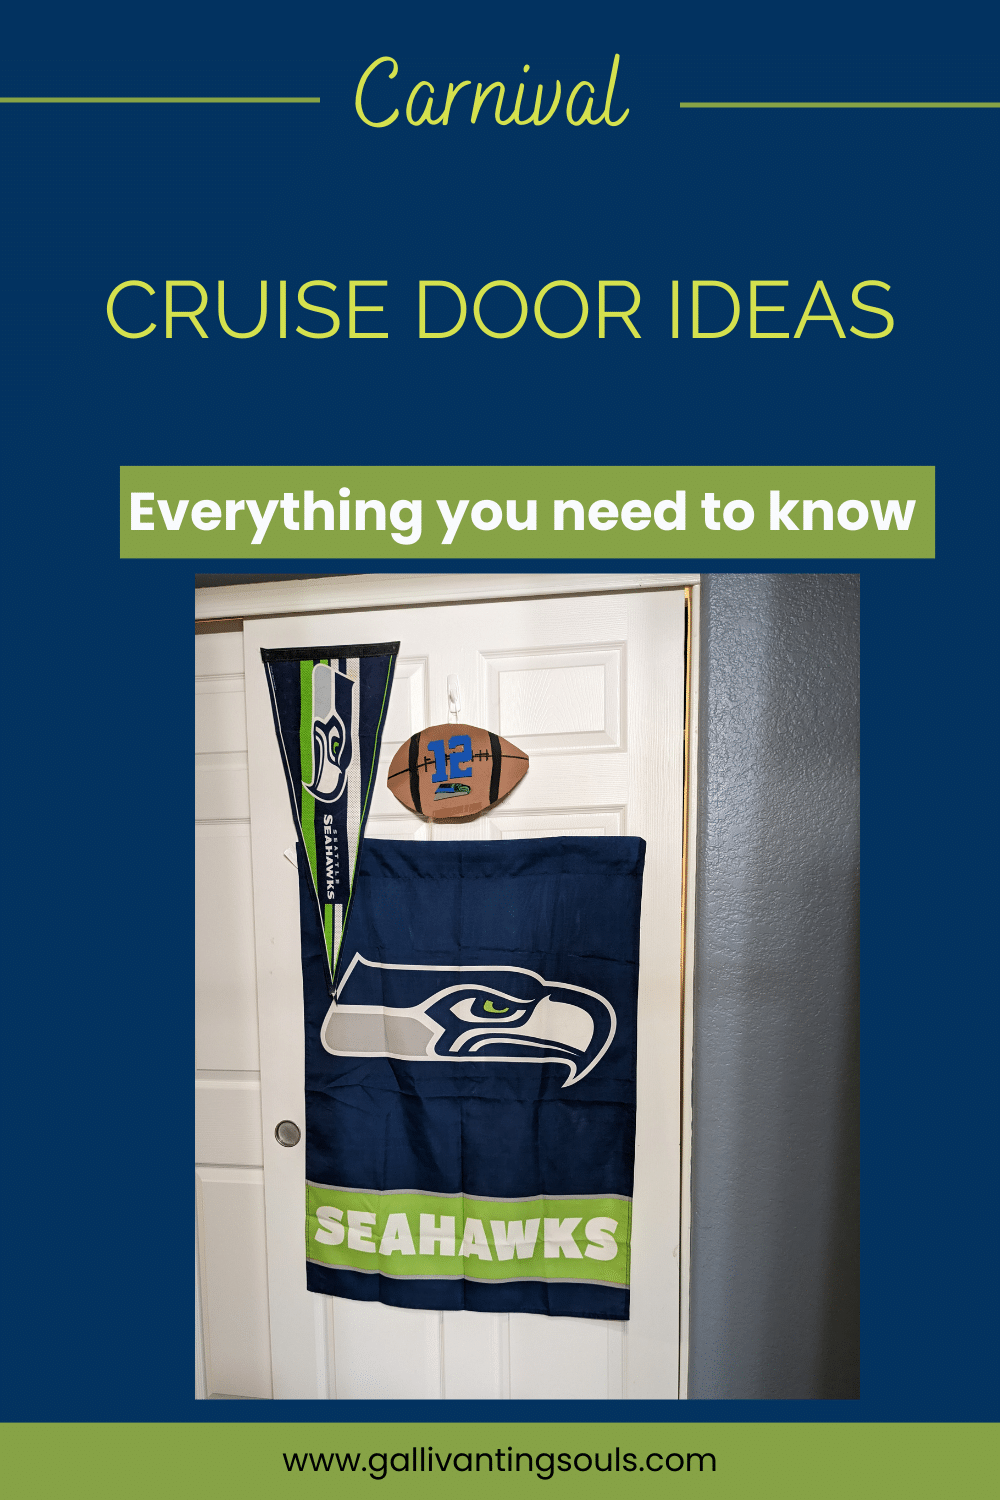 Showing your team spirit is a great way to decorate your cruise door